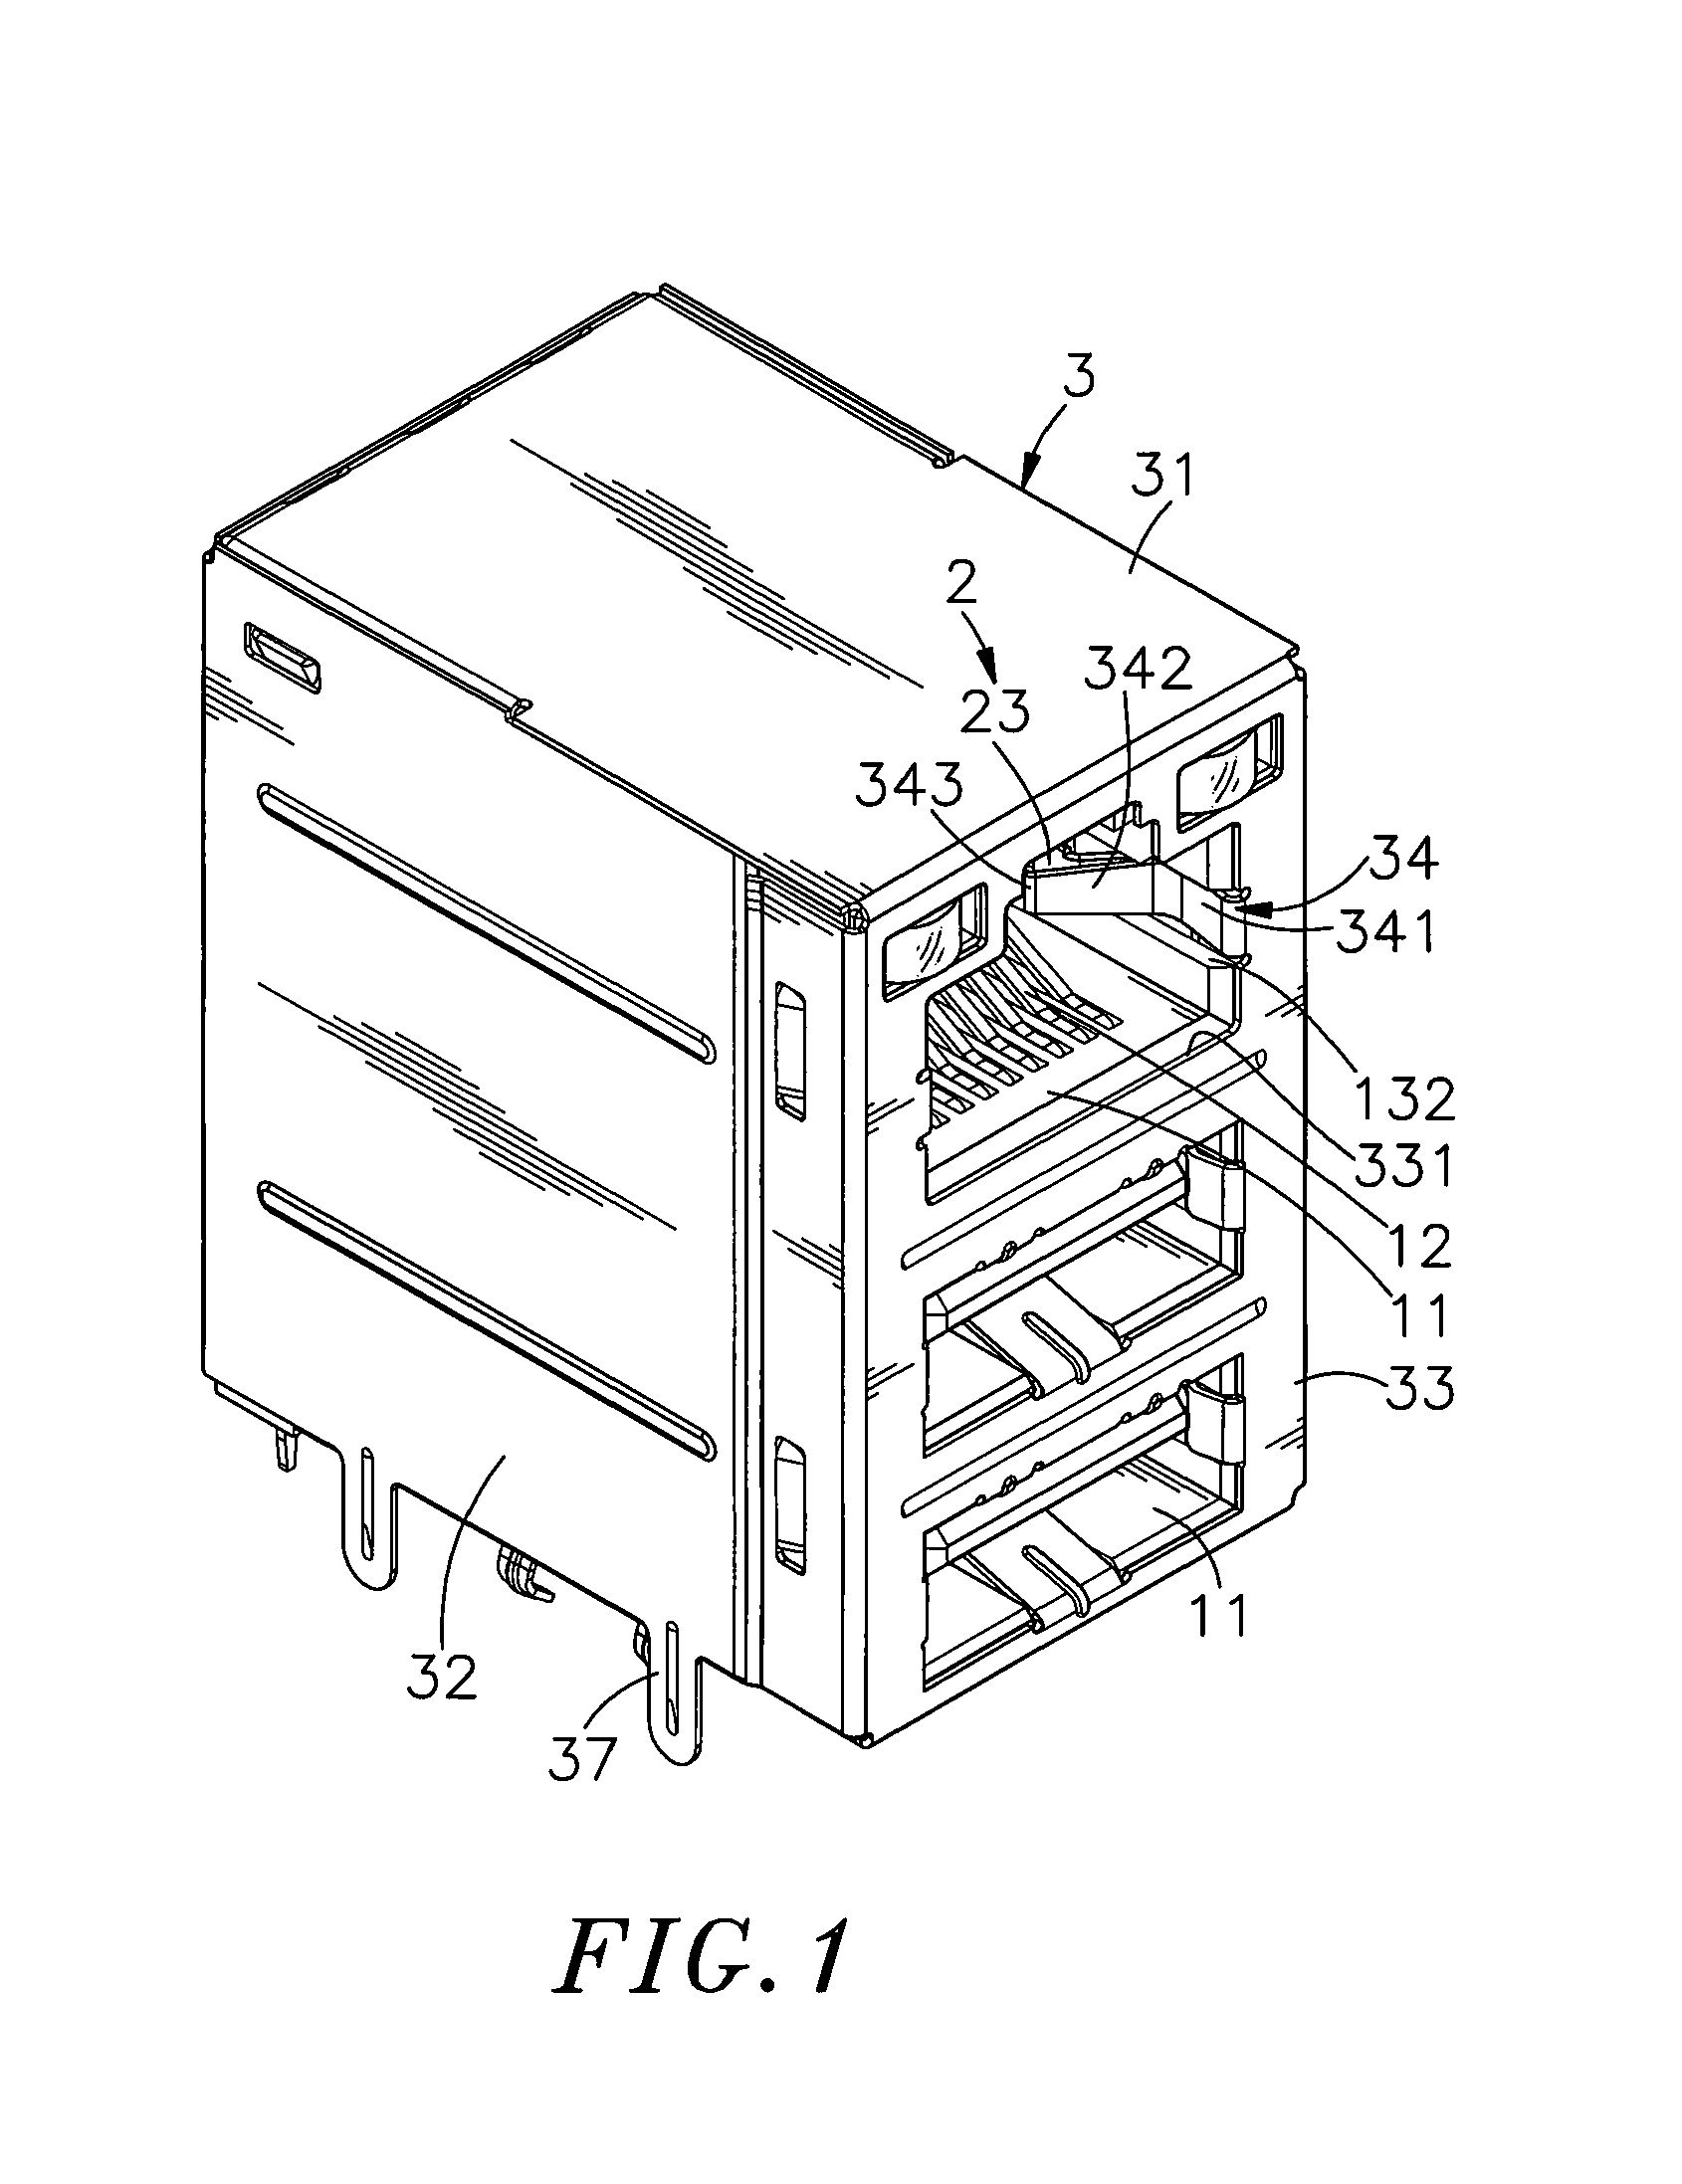 Connector insertion sensing structure